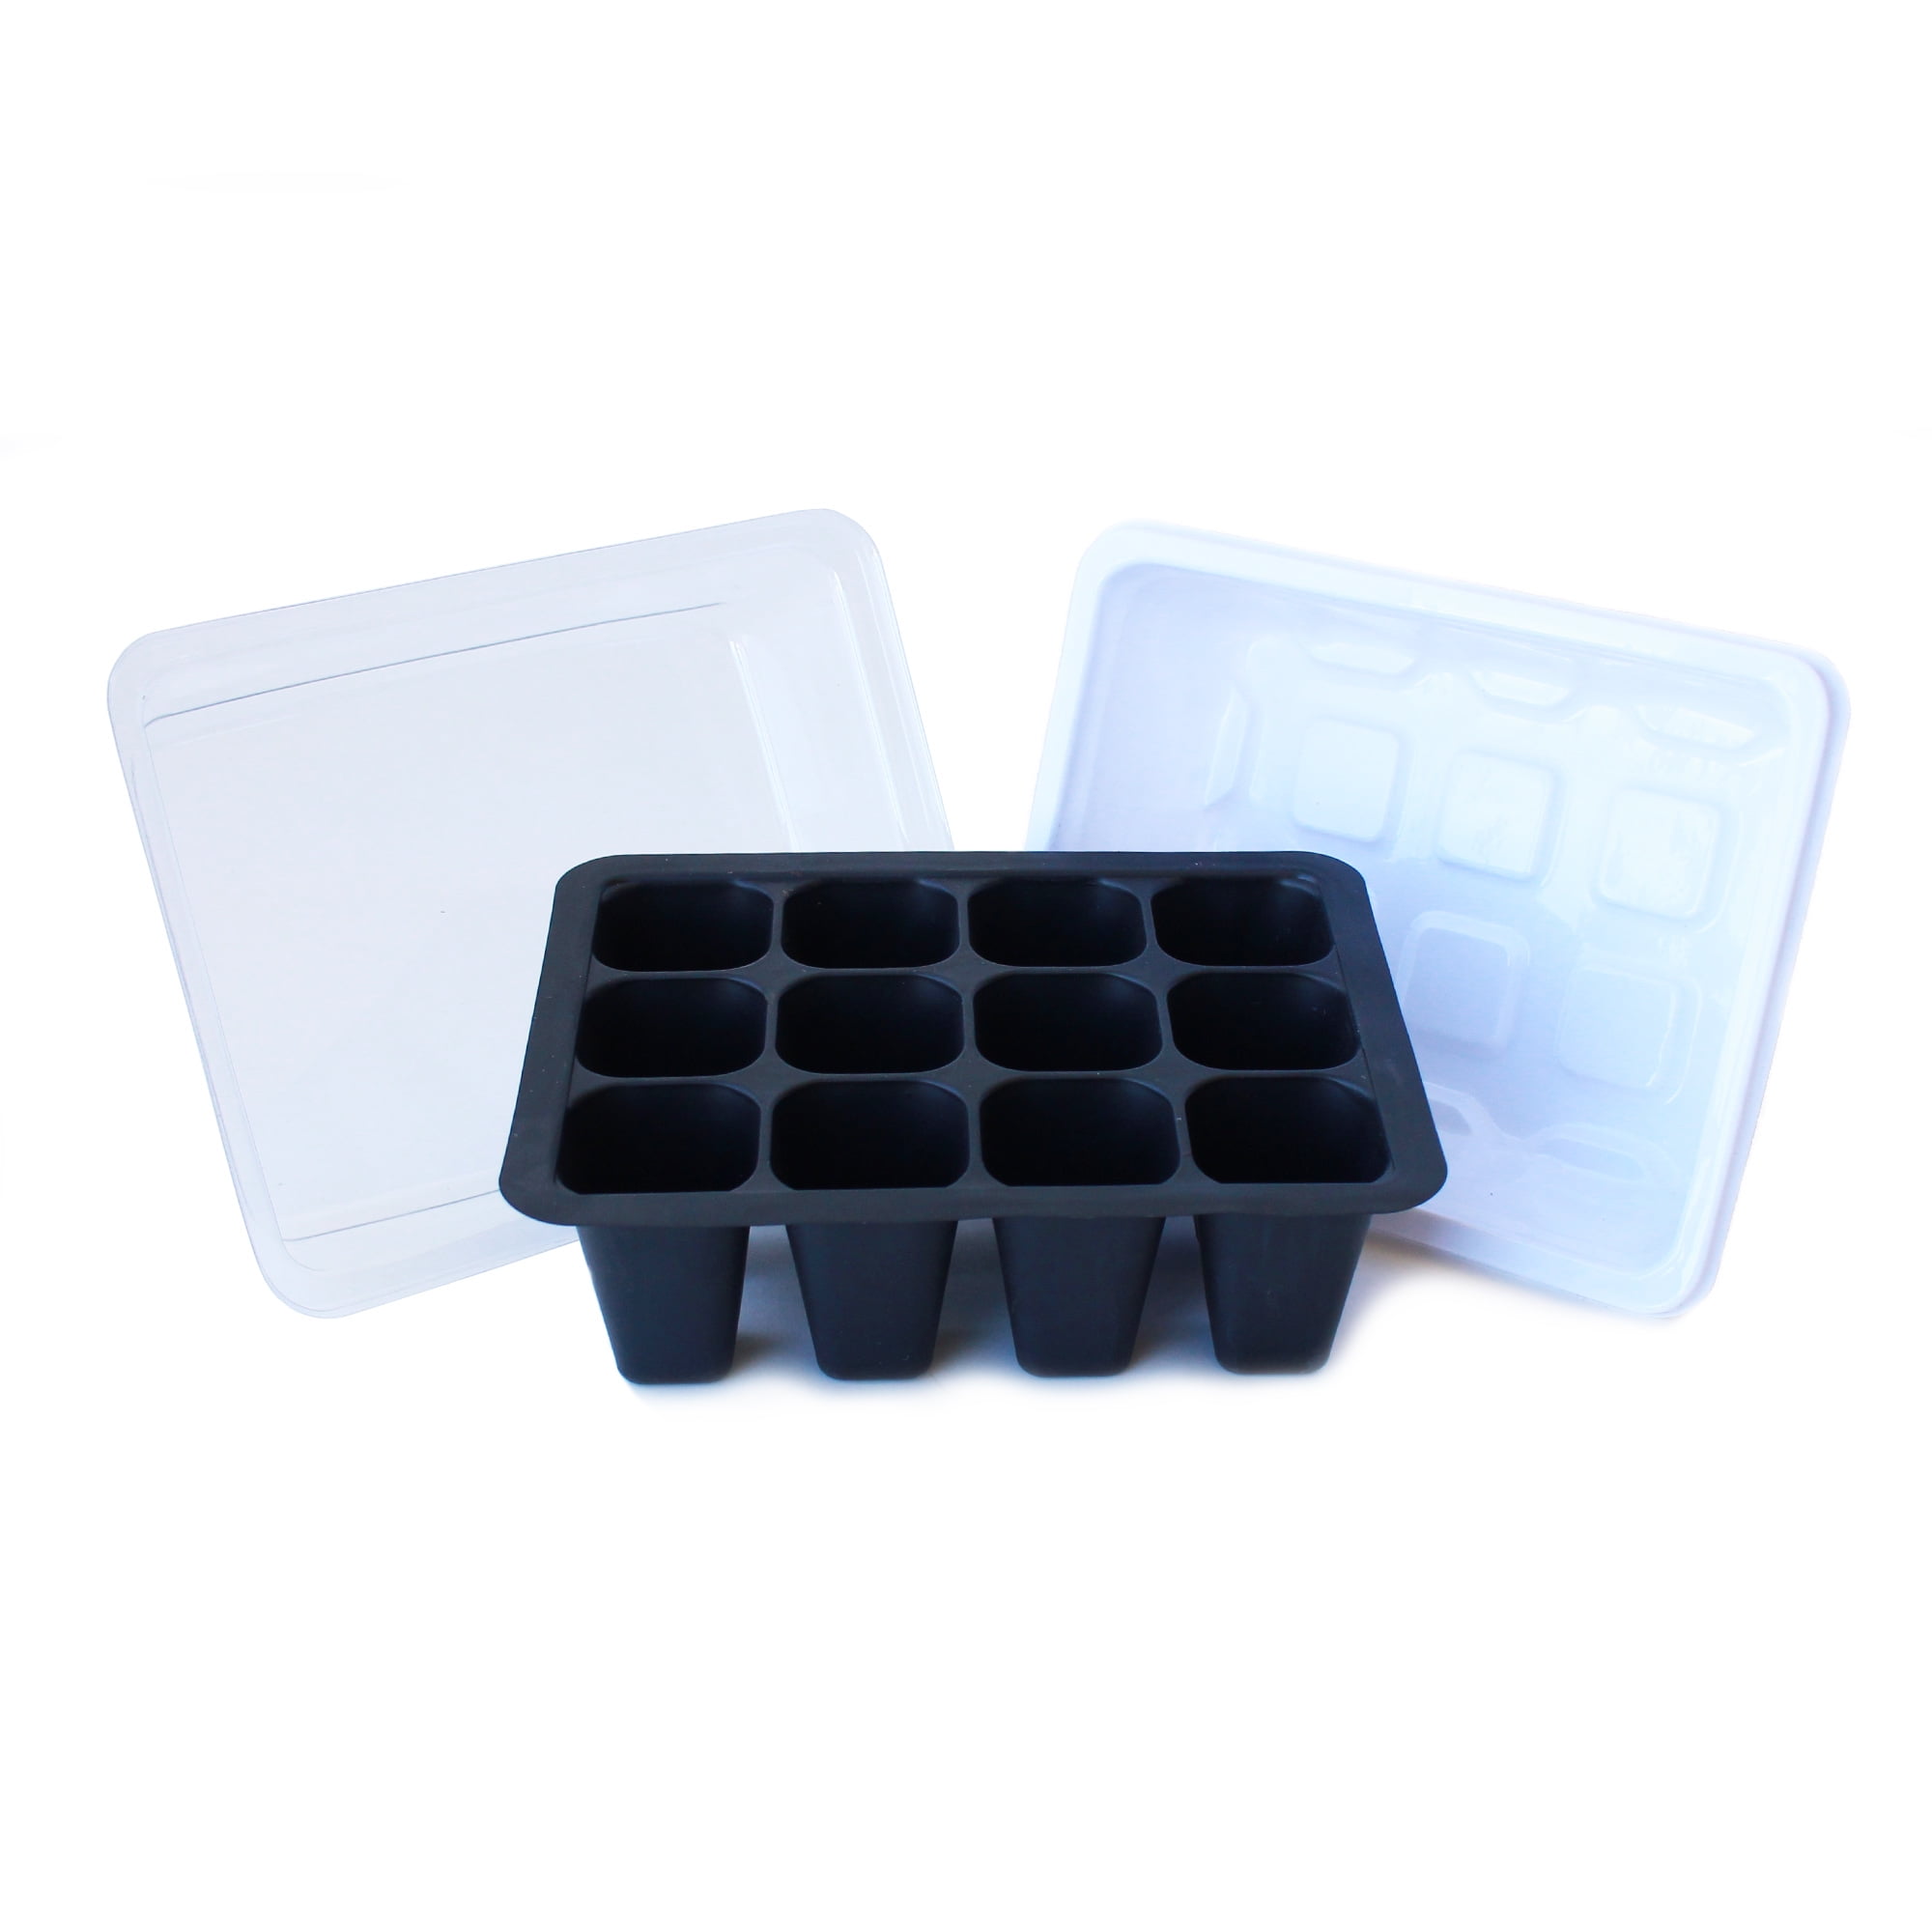 Homend Seed Starter Kit 12 Cell Seed Starter Trays w/ Dome&Base Germination Tray 